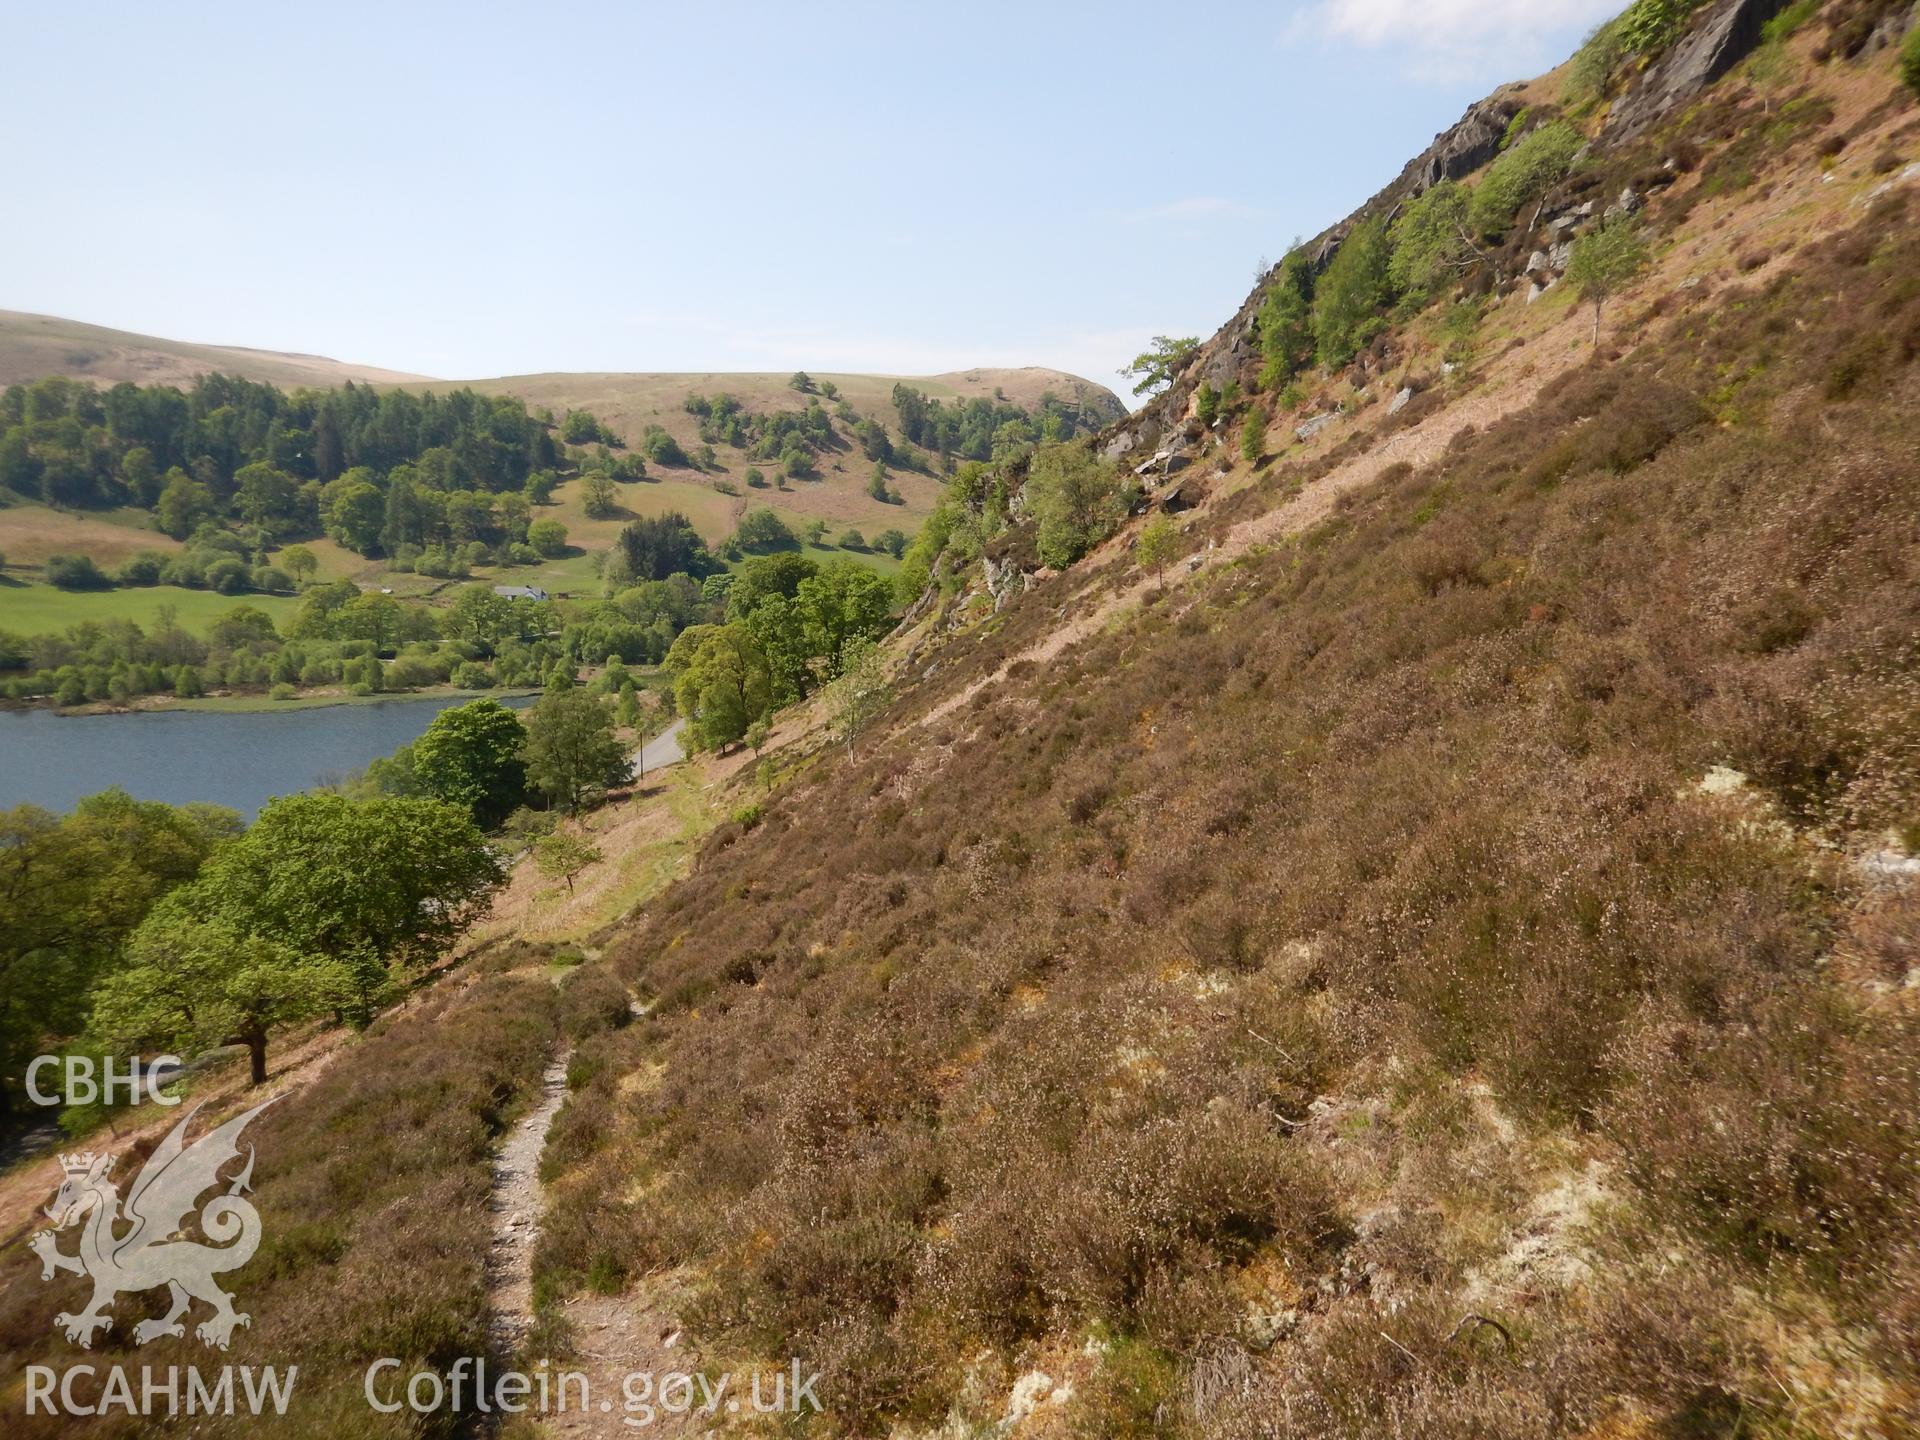 View south-west along proposed cable route up the side of Gurnos Hill. Photographed as part of Archaeological Desk Based Assessment of Afon Claerwen, Elan Valley, Rhayader, Powys. Assessment by Archaeology Wales in 2018. Report no. 1681. Project no. 2573.